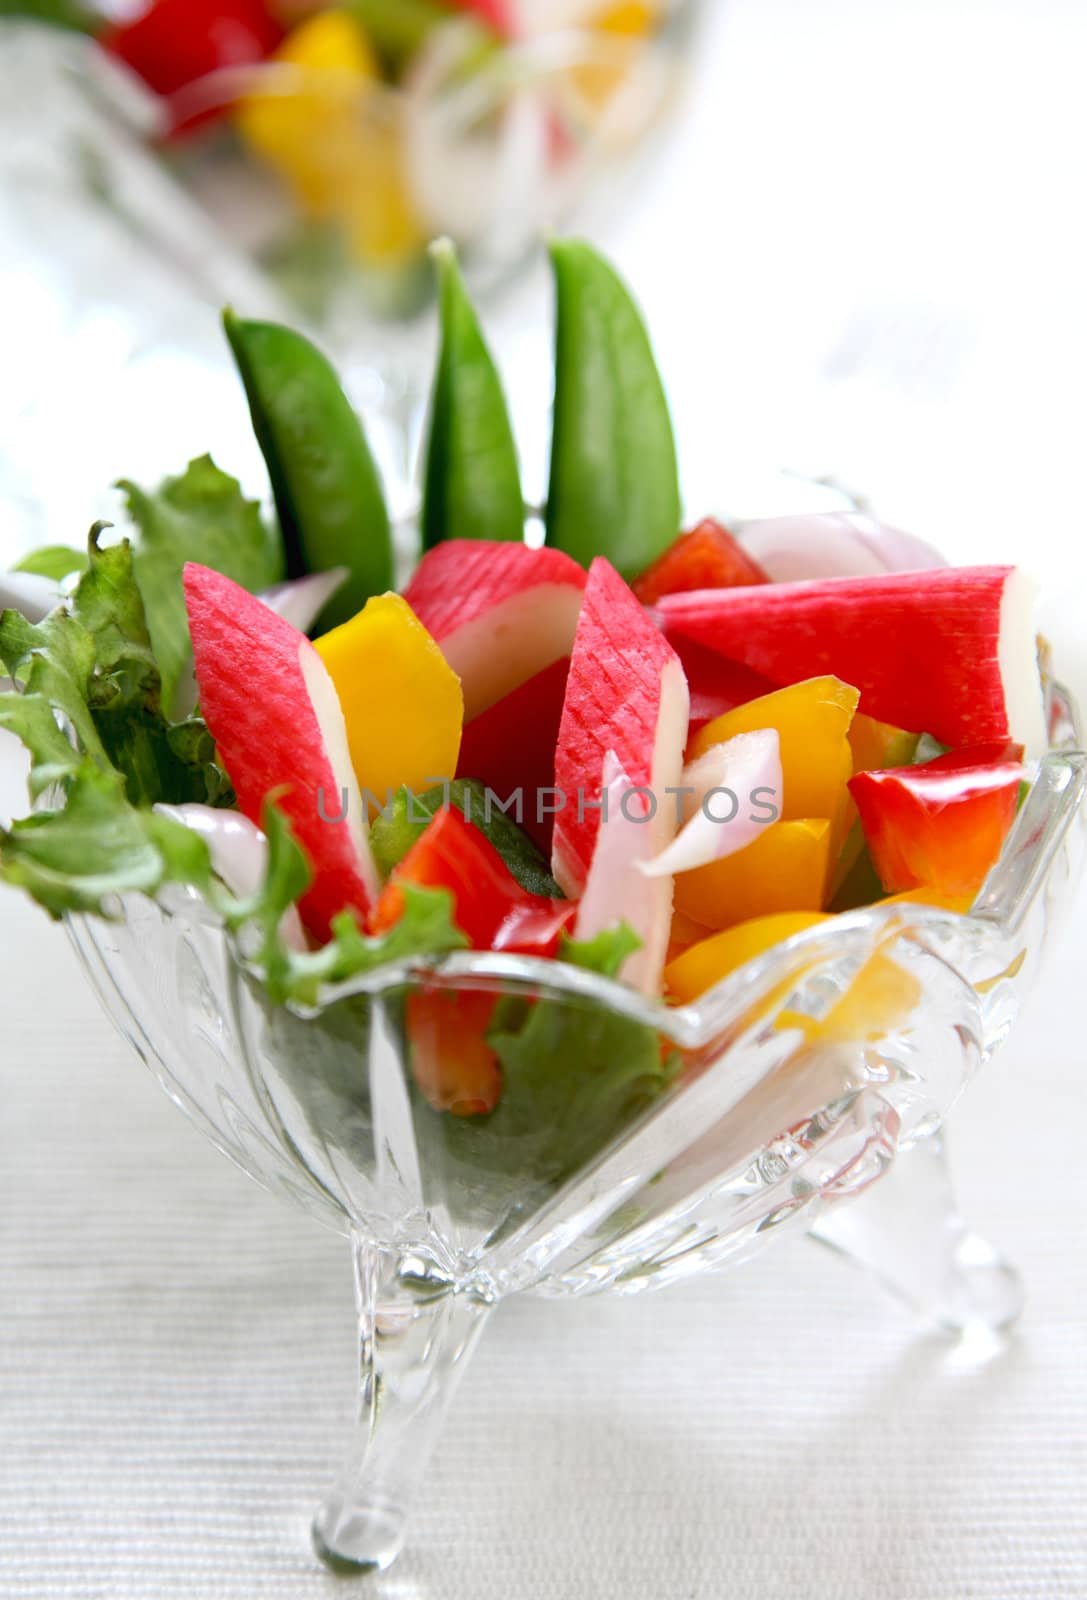 Crab stick with pepper and lettuce salad by vanillaechoes